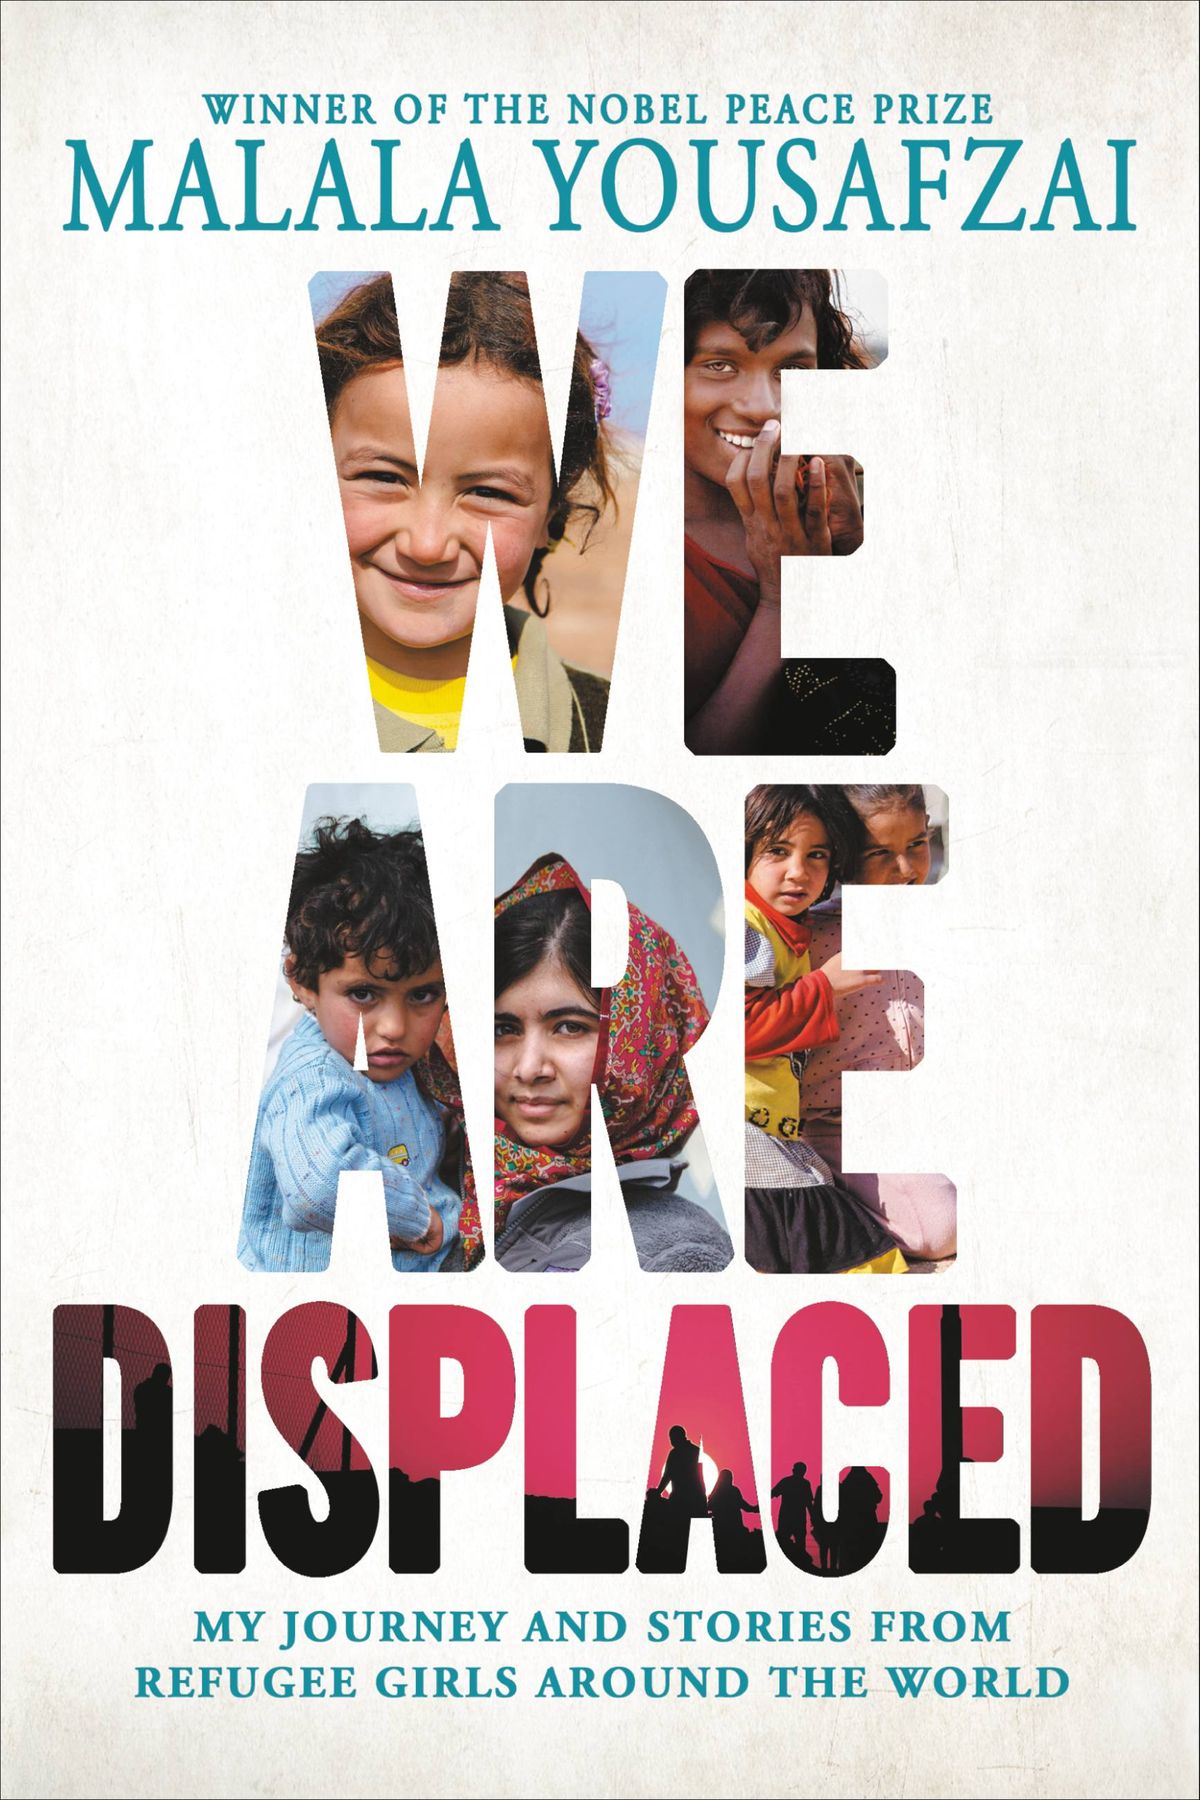 We Are Displaced   My Journey and Stories from Refugee Girls Around the World edited by Malala Yousafzai